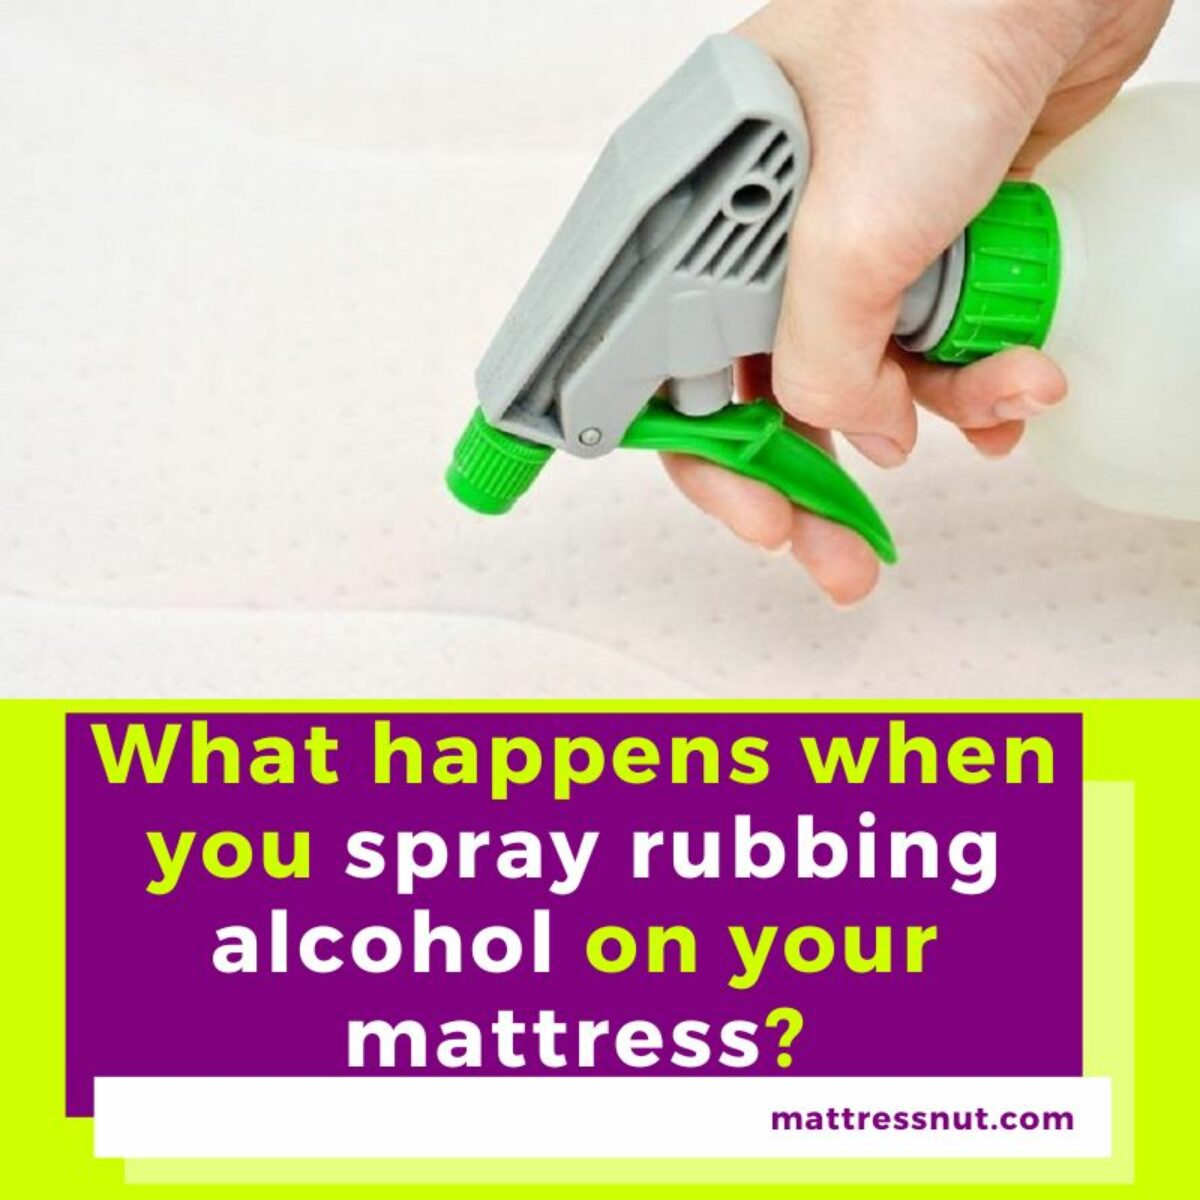 Benefits Of Spraying Alcohol On Your Mattress